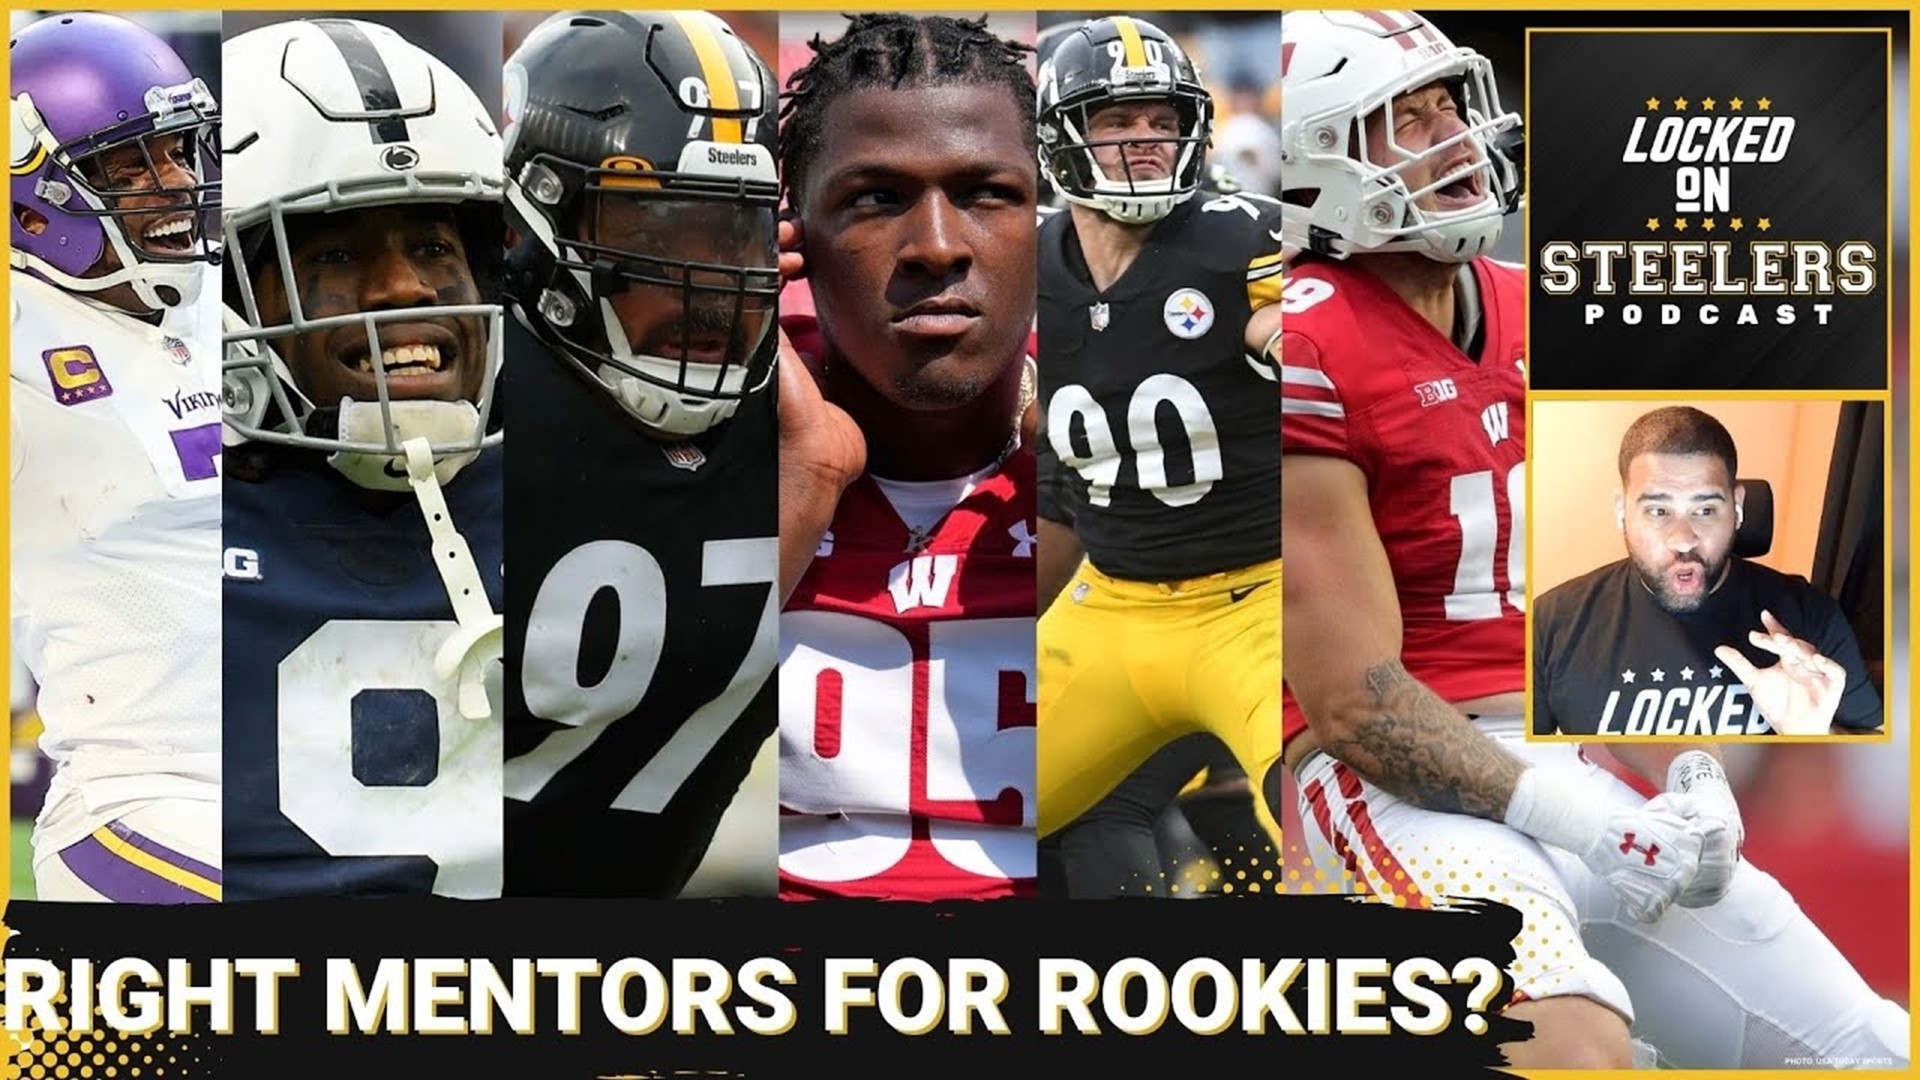 After the Pittsburgh Steelers' first week of OTAs, veterans like Patrick Peterson, T.J. Watt and Cam Heyward talked about rookies learning under them.